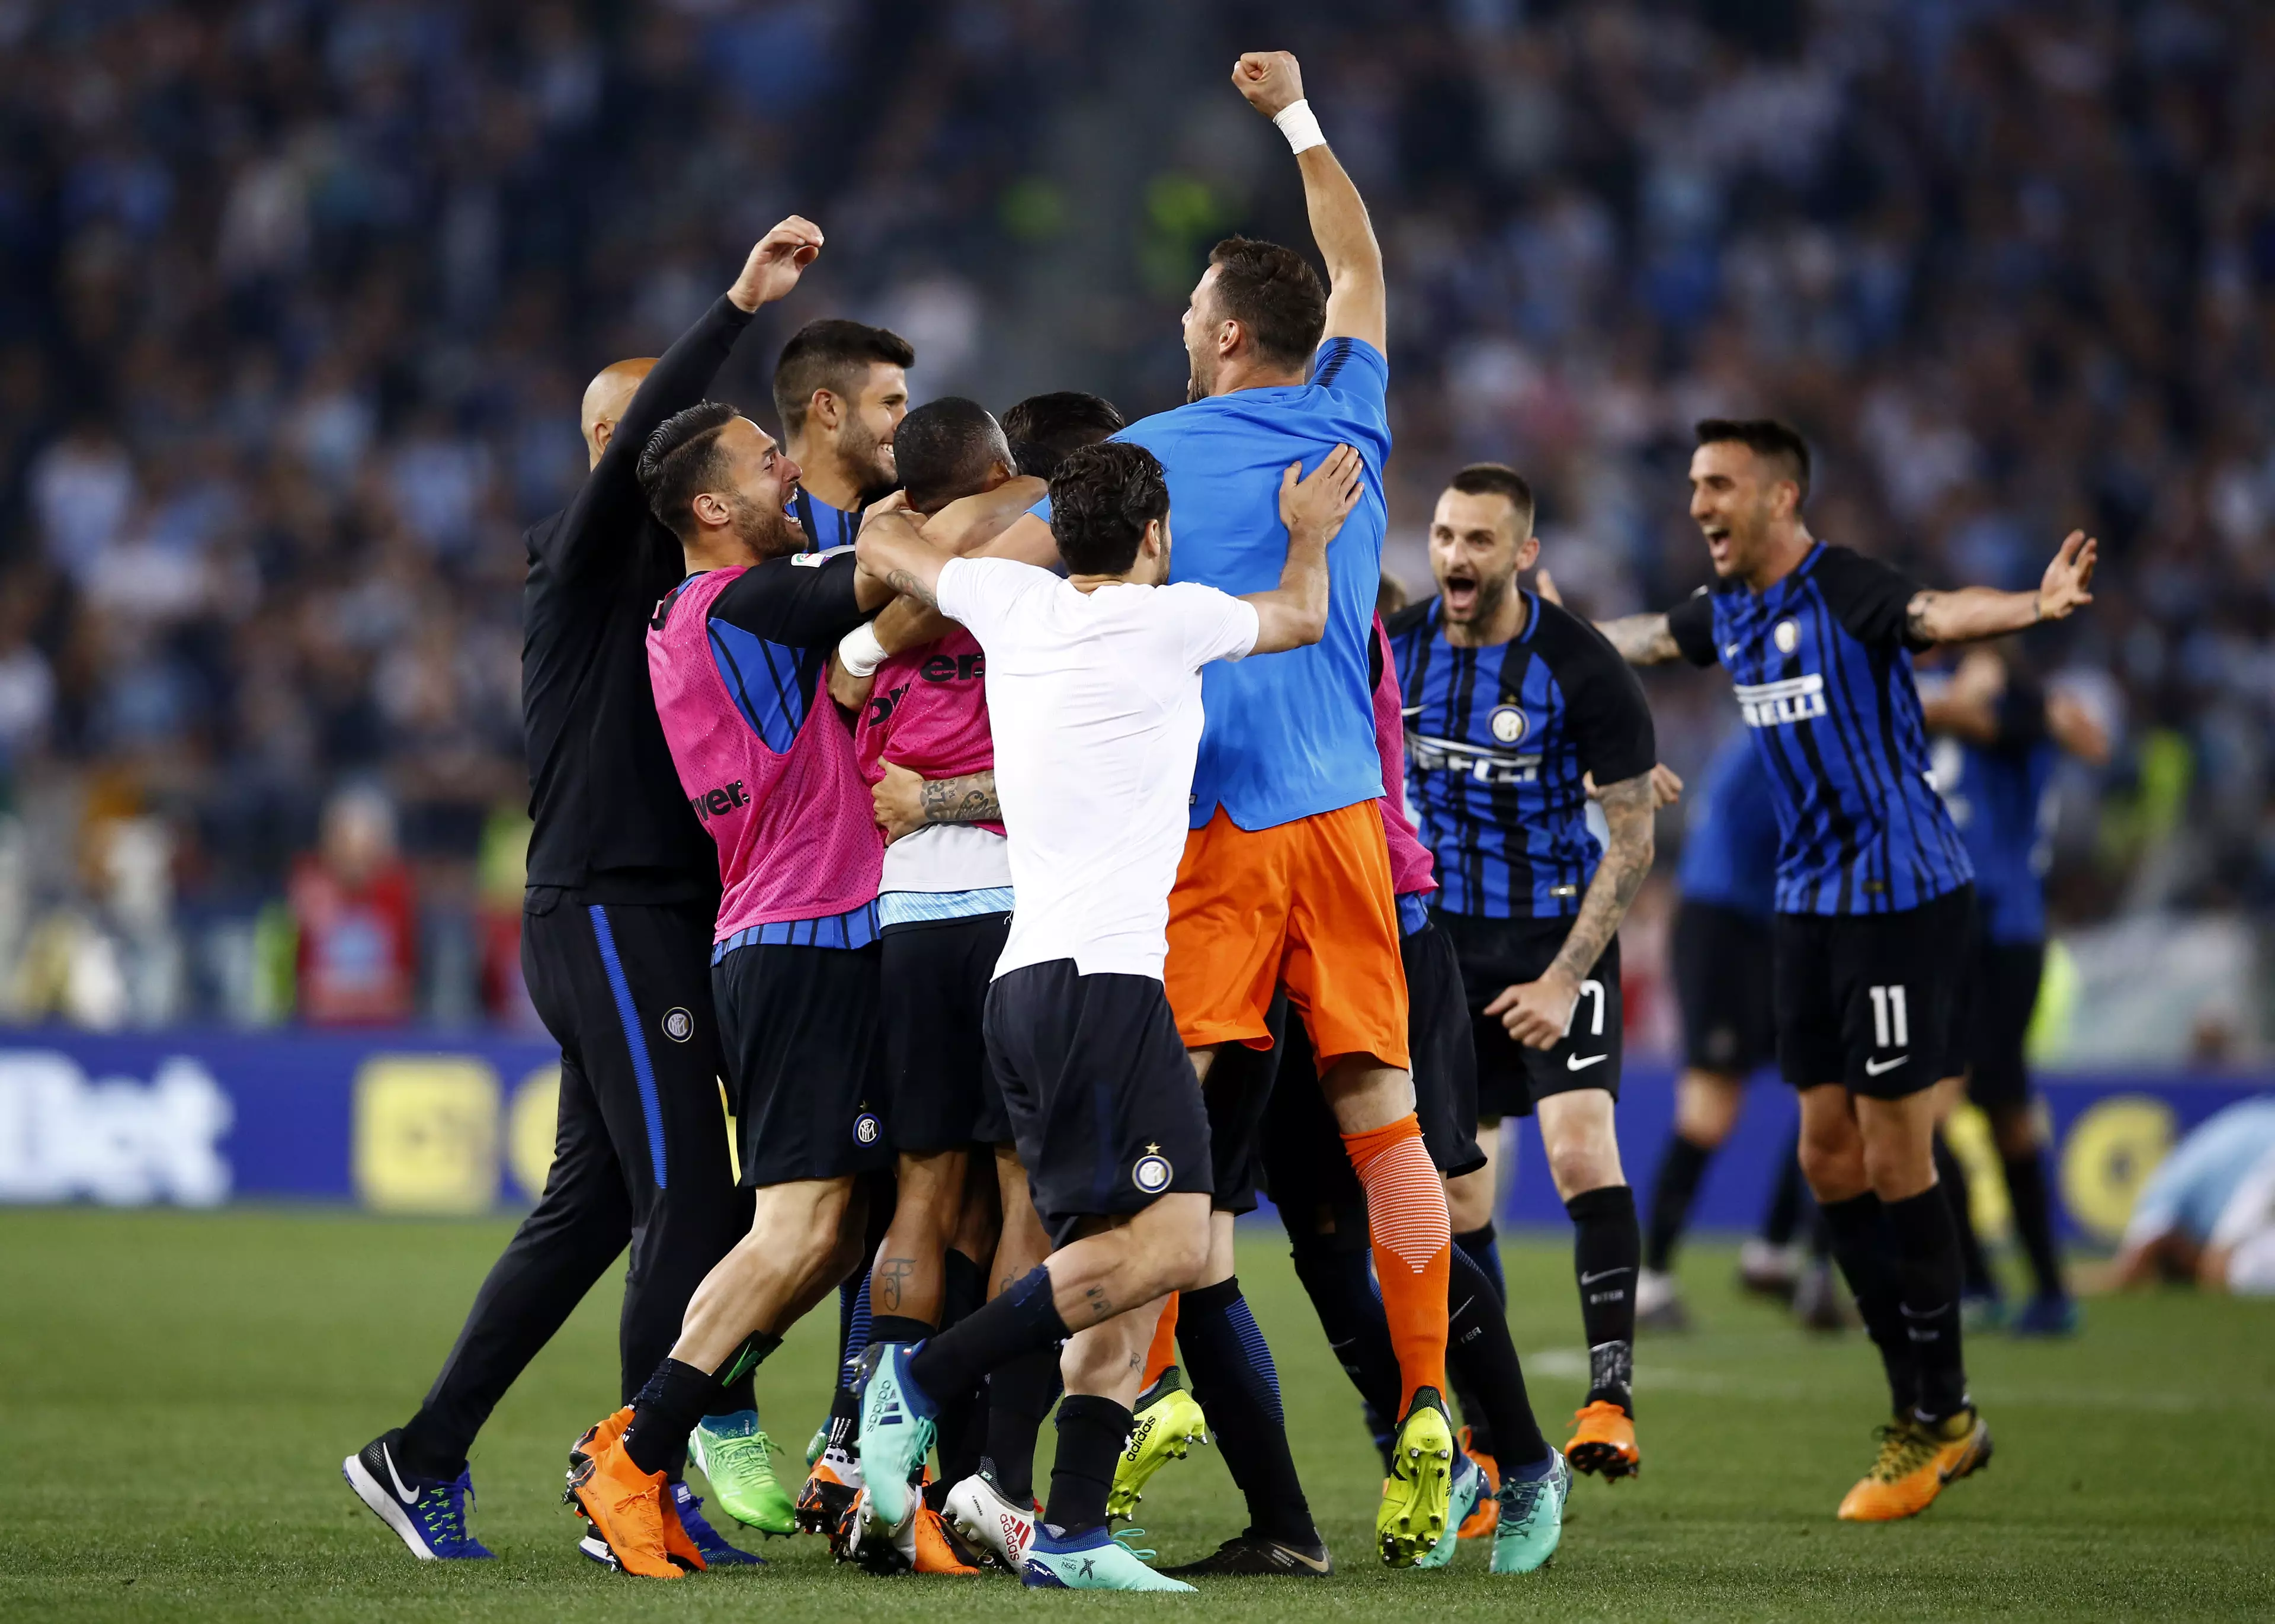 Inter celebrate their late winner. Image: PA Images